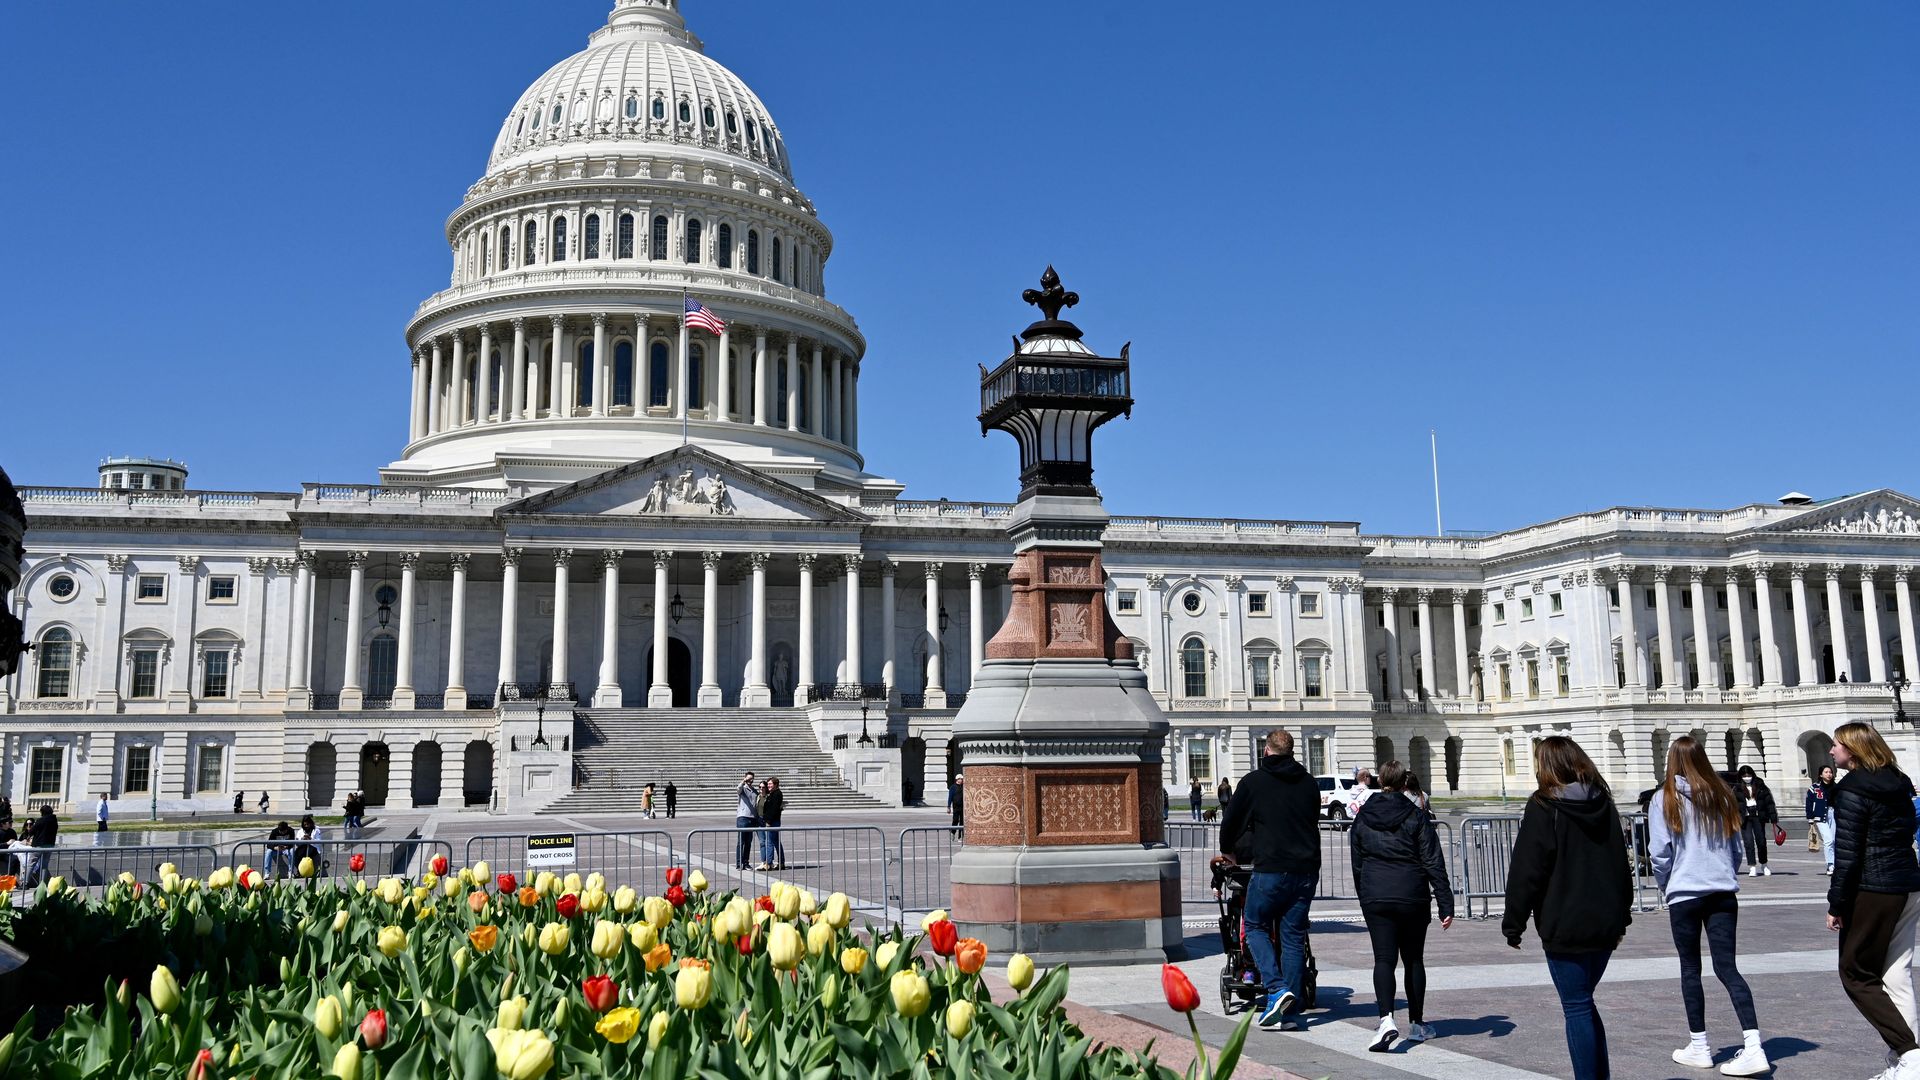 Tourists are seen walking by tulips in front of the U.S. Capitol.